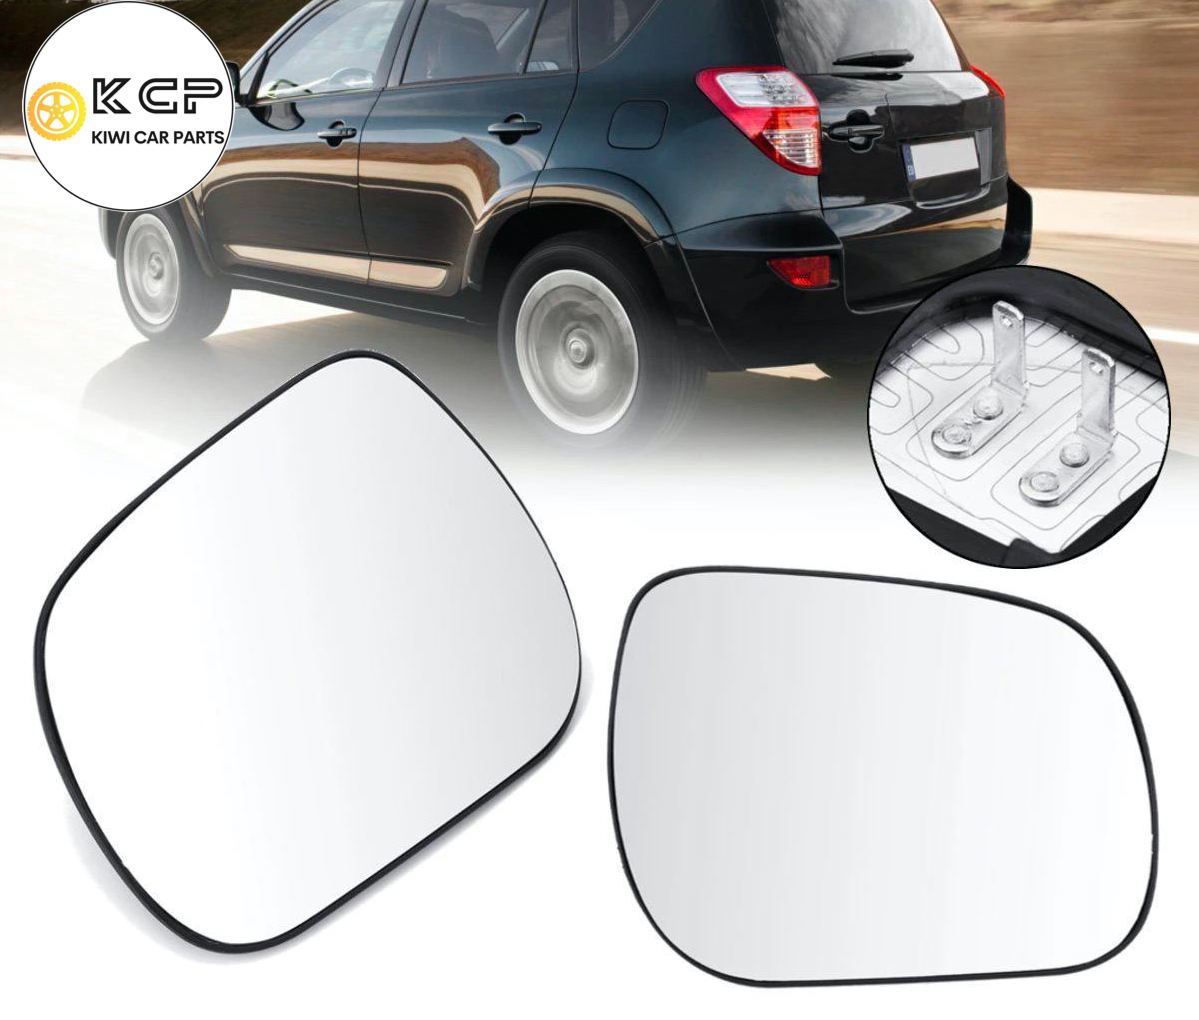 1PCS Front Right Rearview Side Mirror Glass suits for TOYOTA RAV4 2006 2007 2008 2009 2010 2011 2012